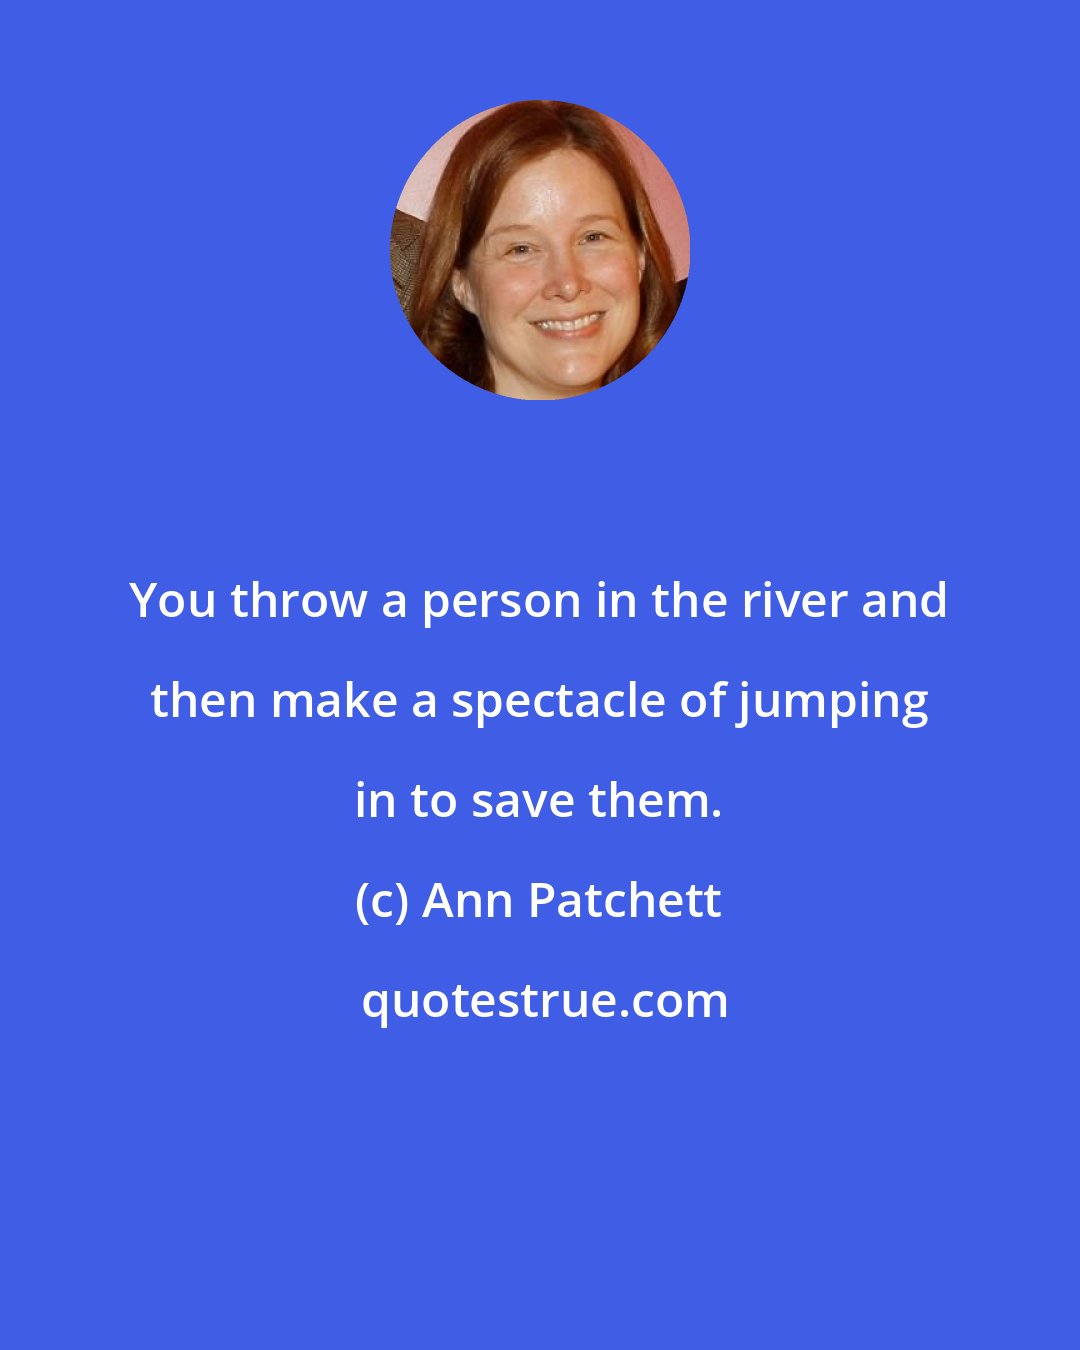 Ann Patchett: You throw a person in the river and then make a spectacle of jumping in to save them.